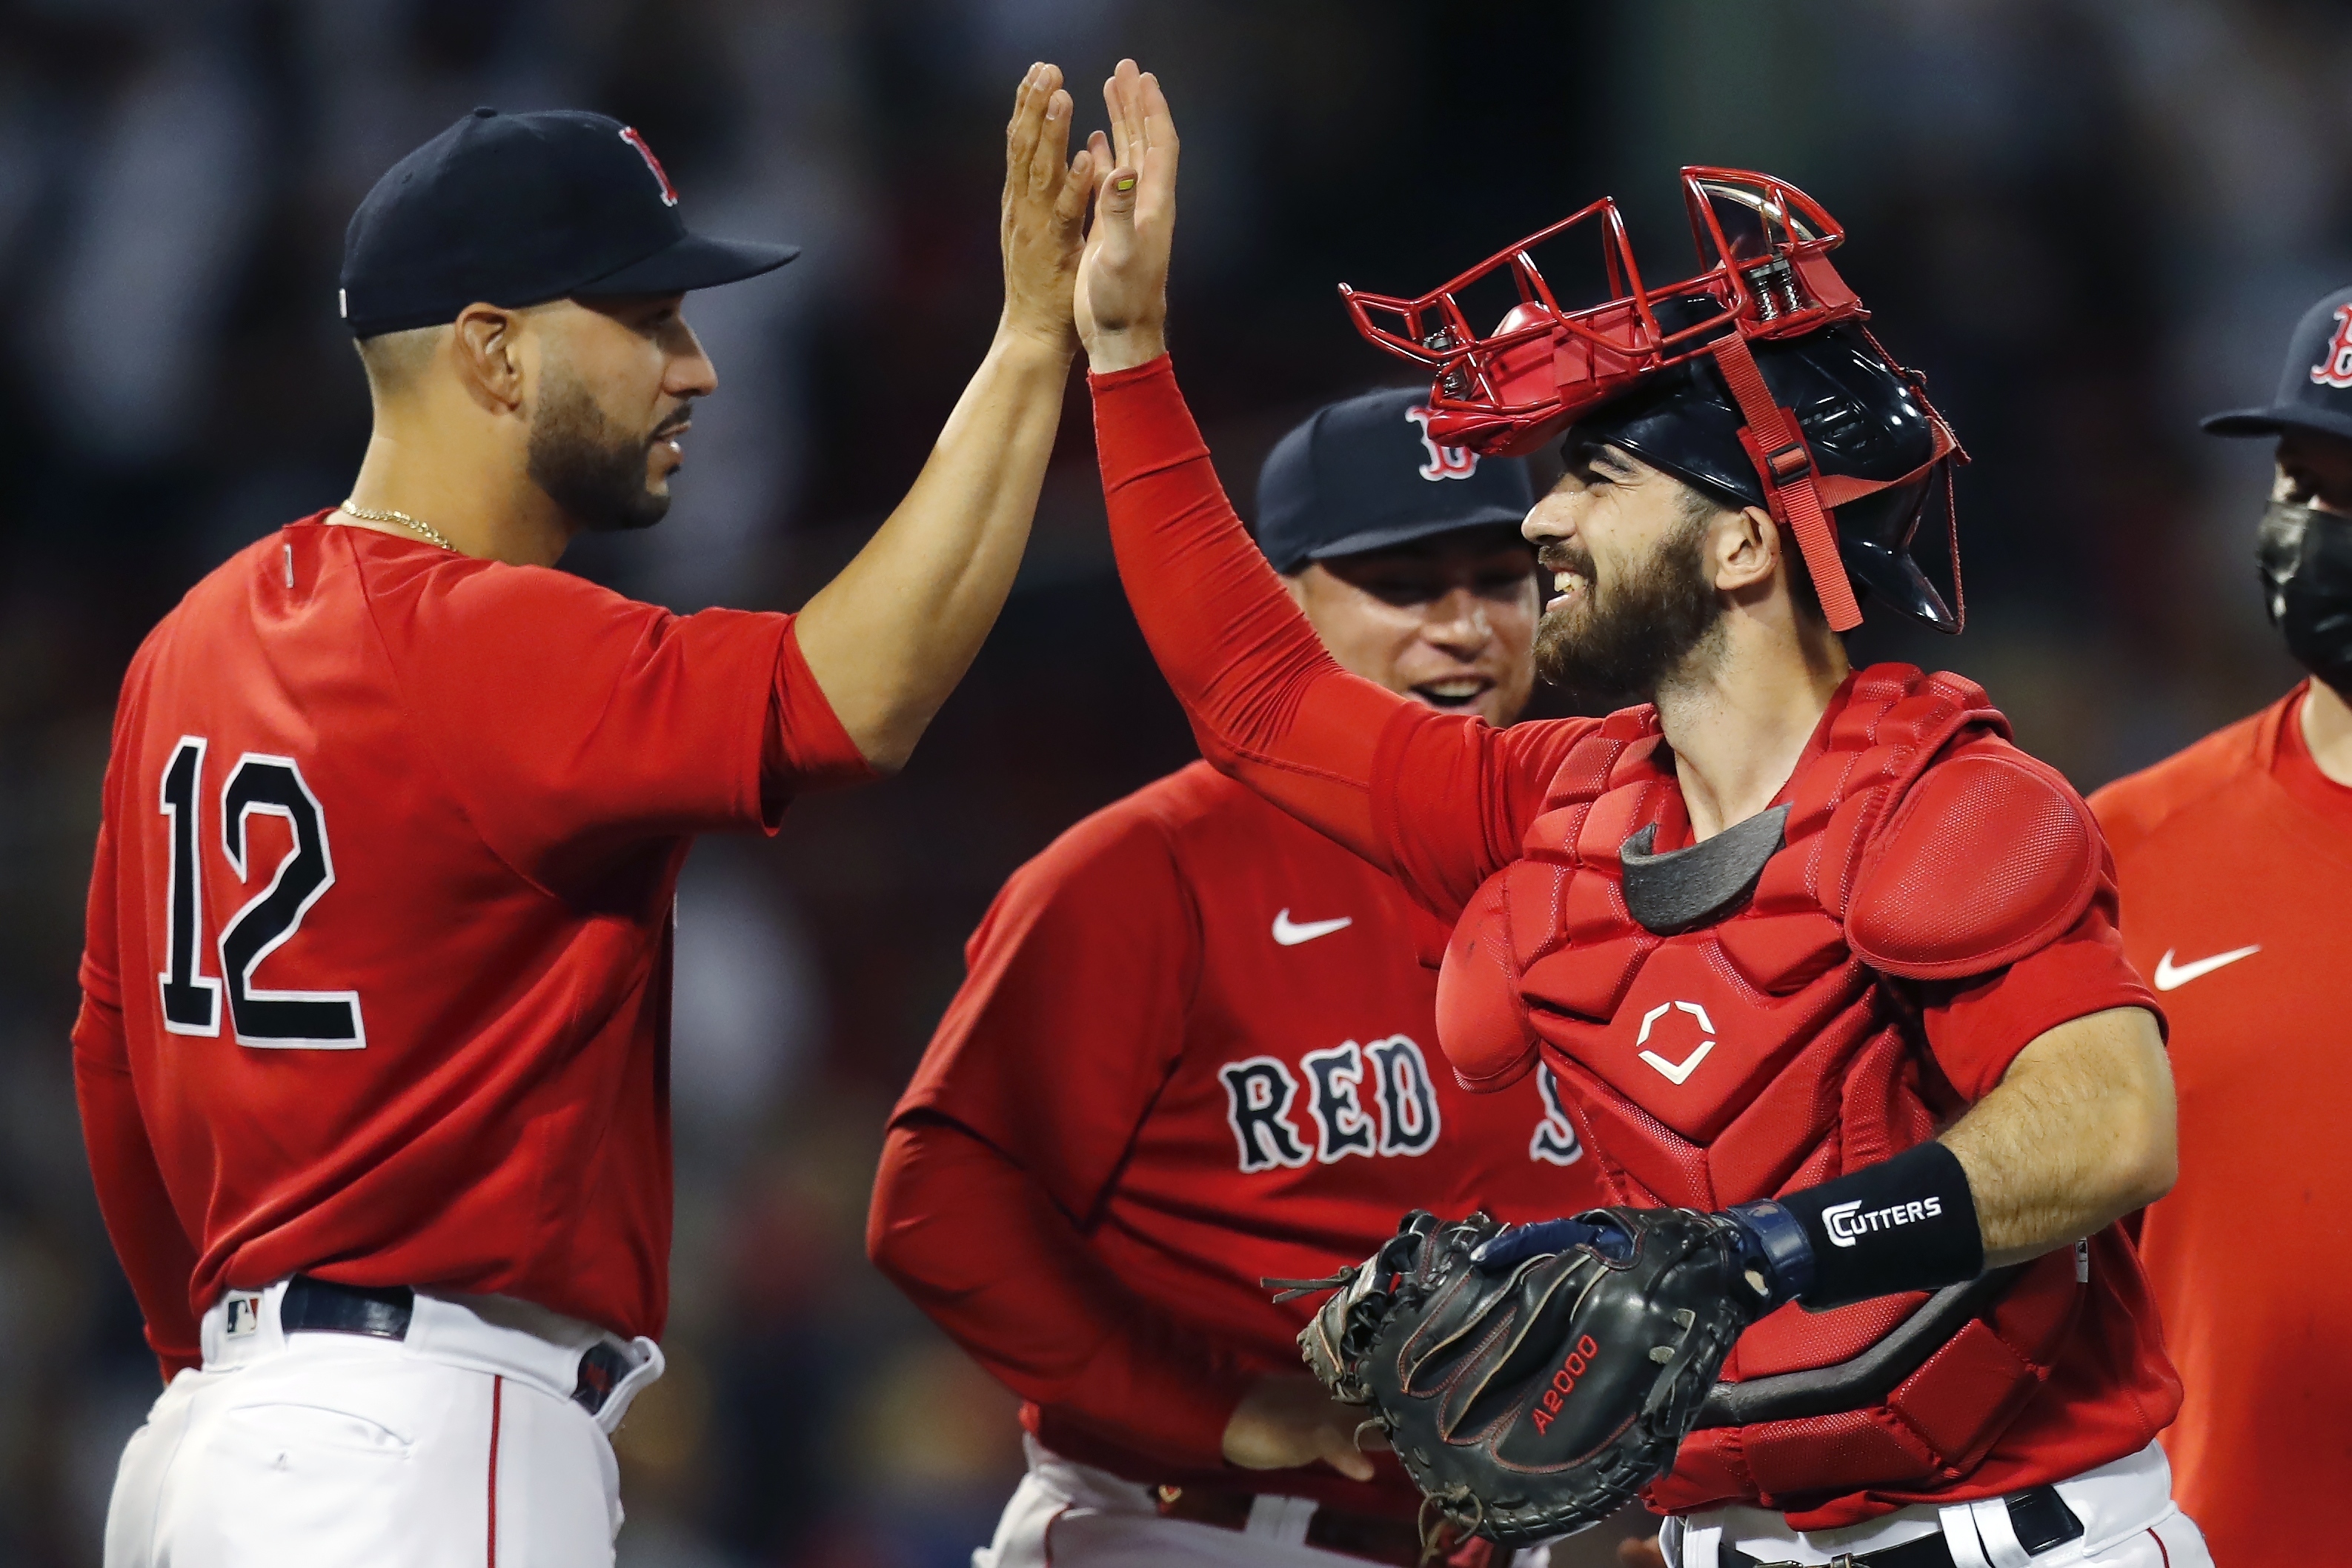 Red Sox Teammates Thrilled For First-Time MLB All-Star Nathan Eovaldi